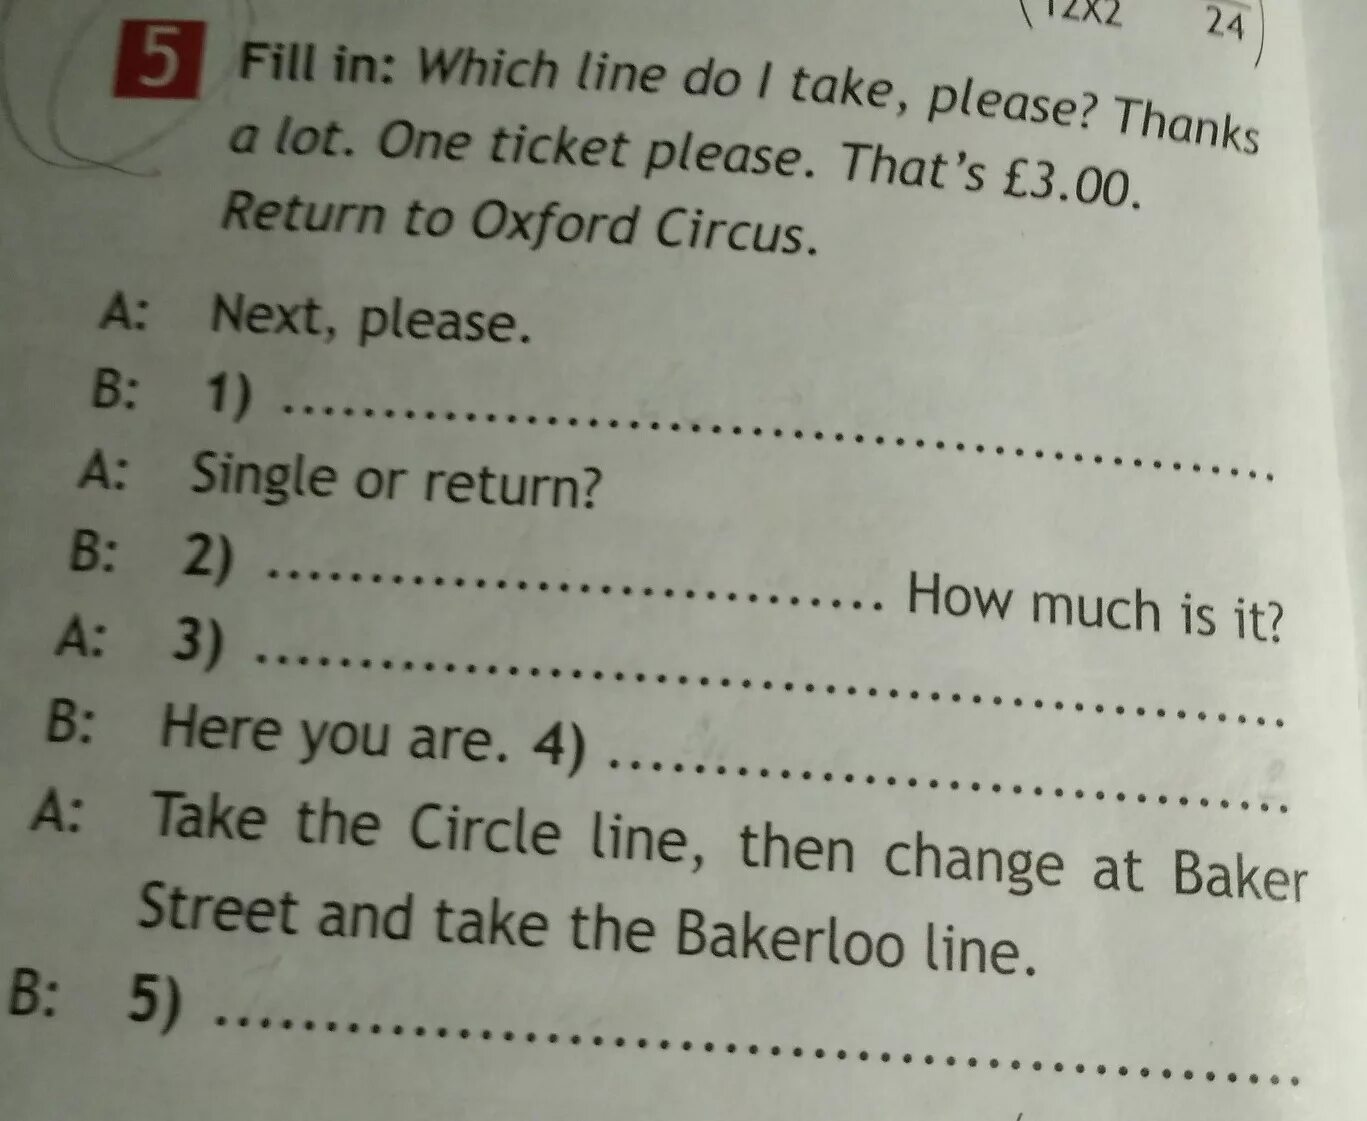 Please fill in this. Complete the Dialogue use which line do i take please. Complete the Dialogue use which line do take please thanks a lot one ticket please that's£ 3 00 Return to Oxford Circus. Thanks a lot. Nest please two tickets please как читается.